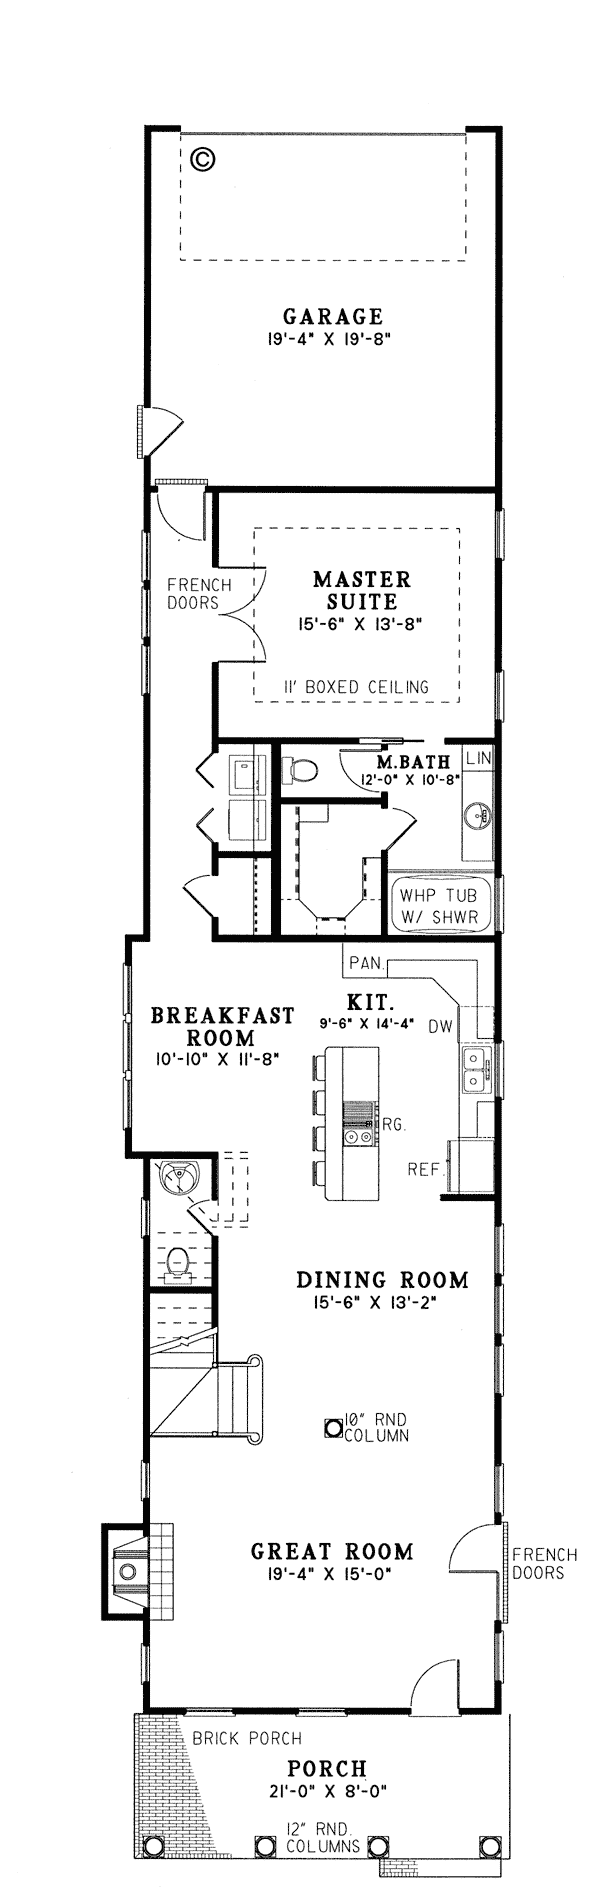 House Plan 61061 Southern Style with 2177 Sq Ft, 3 Bed